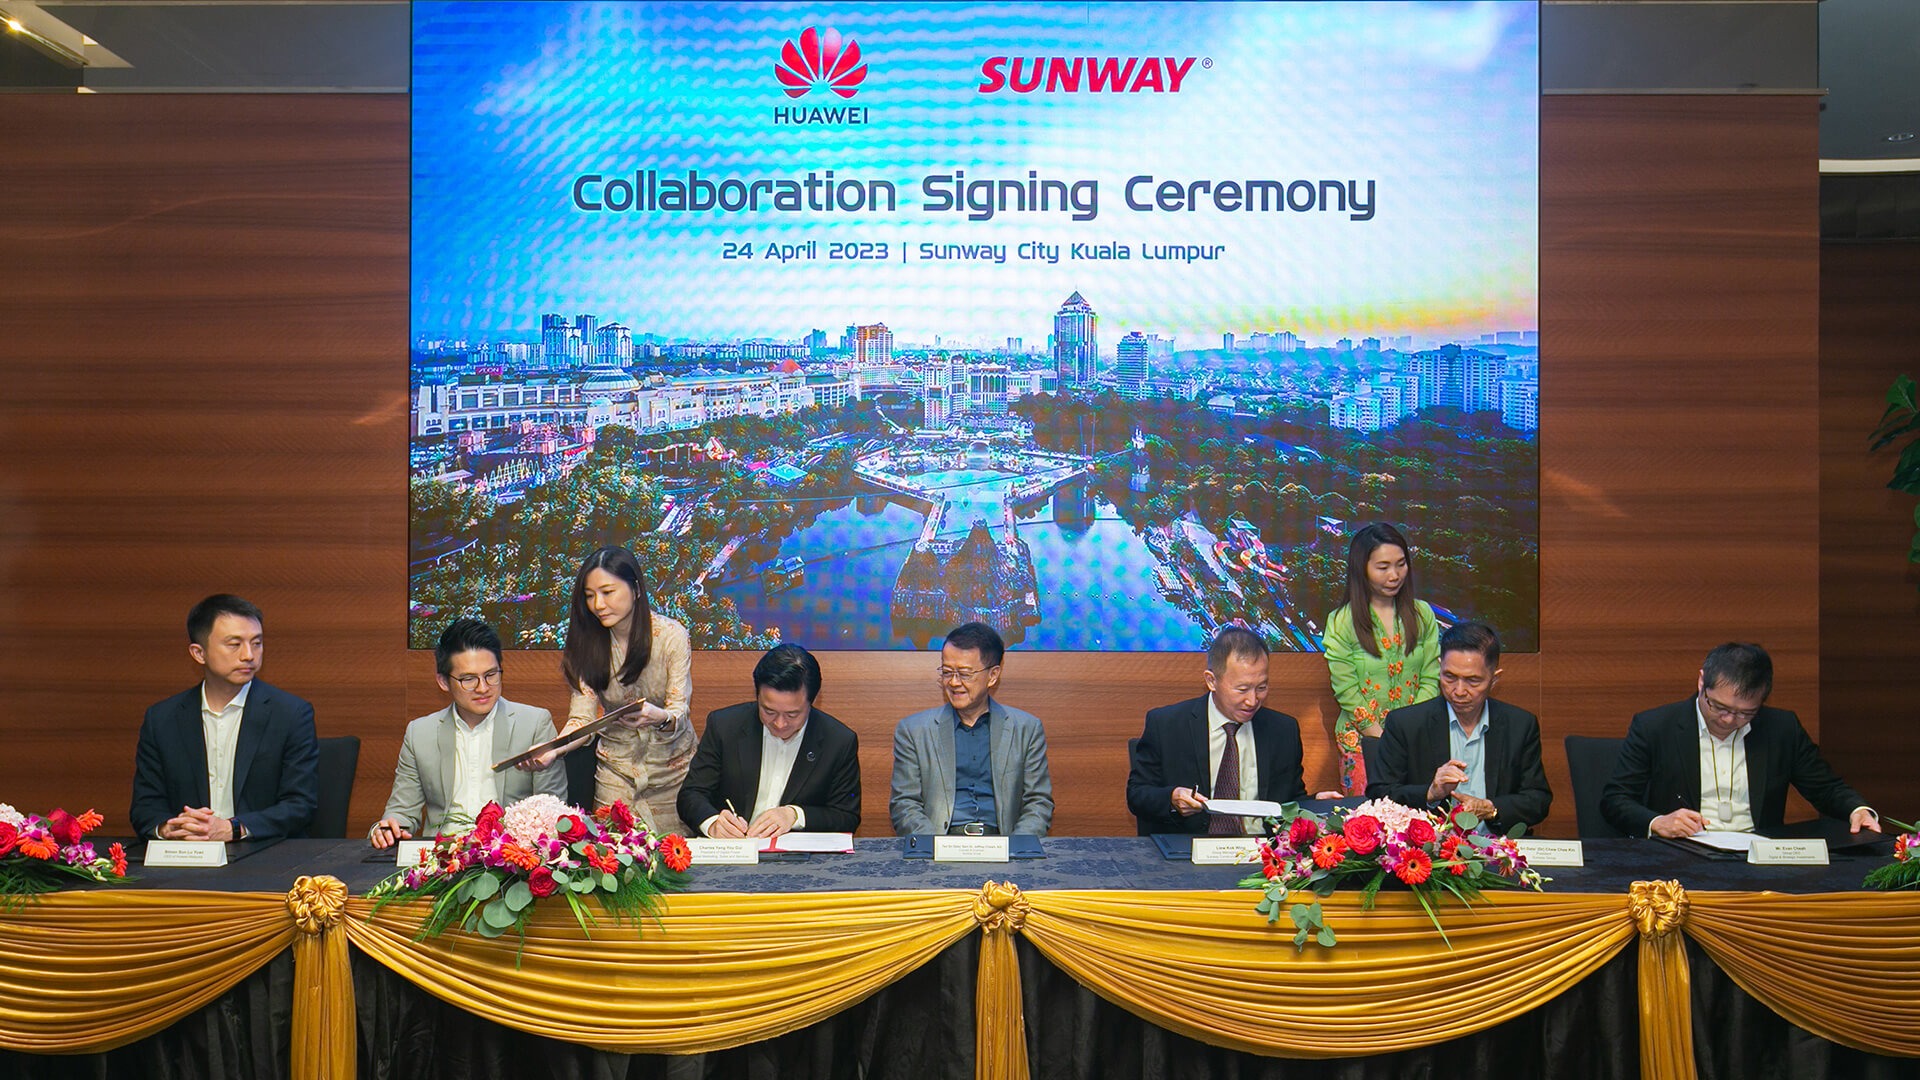 Sunway and Huawei expand partnership to drive digital transformation across ASEAN